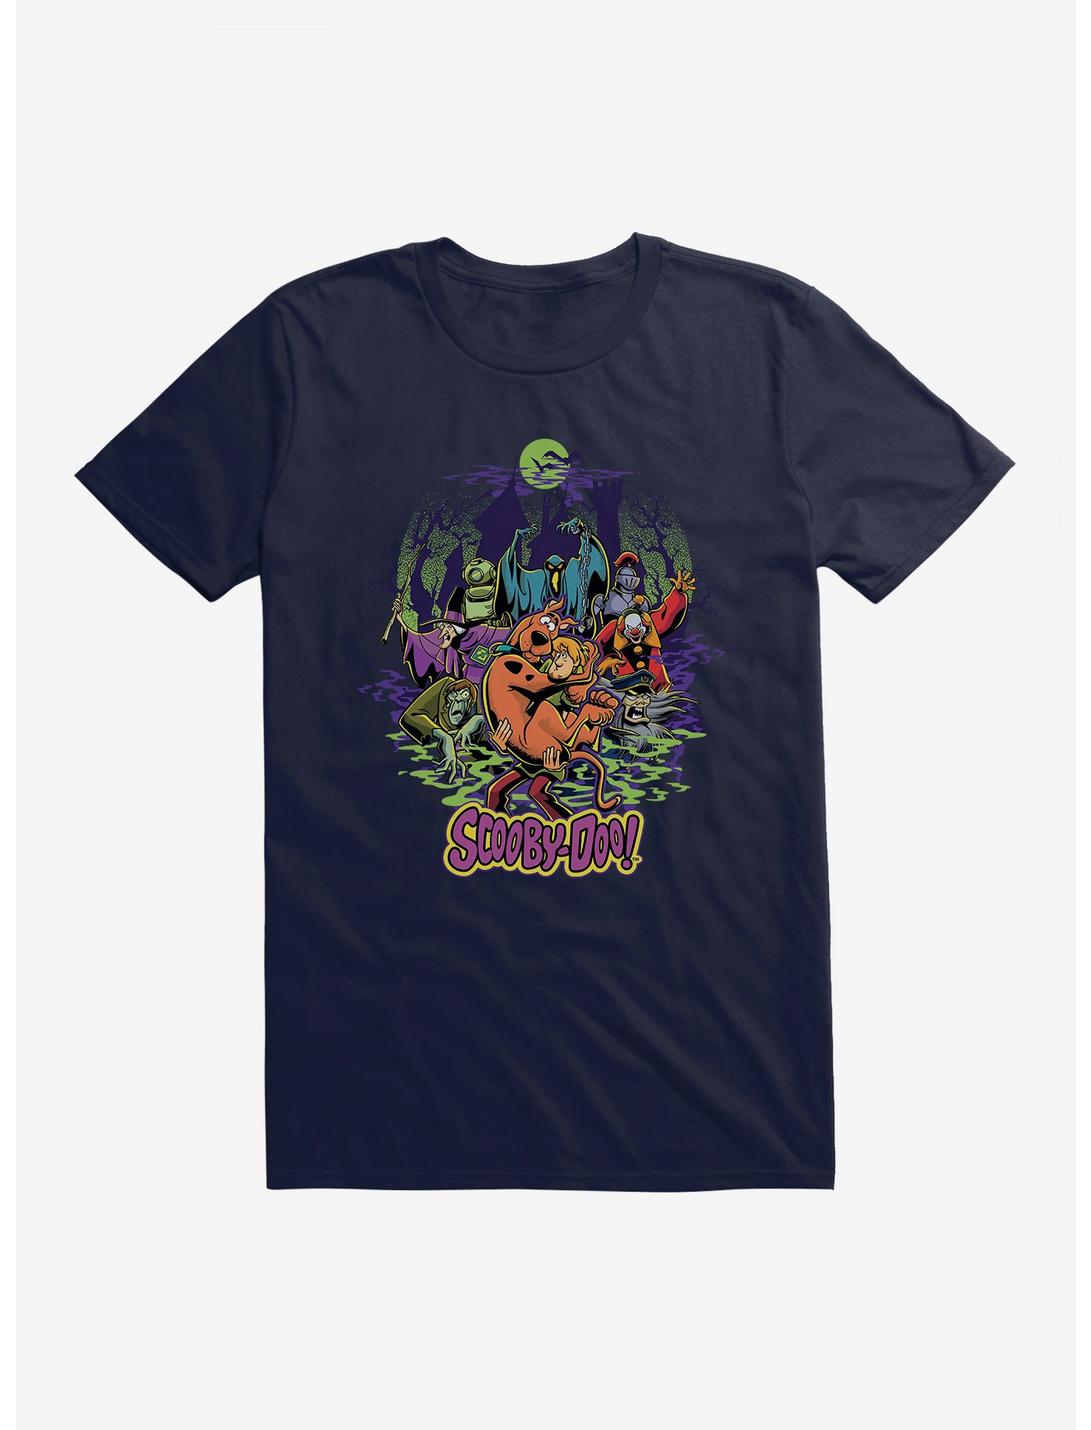 Scooby-Doo Spooky Monsters Shaggy And Scooby T-Shirt, NAVY, hi-res